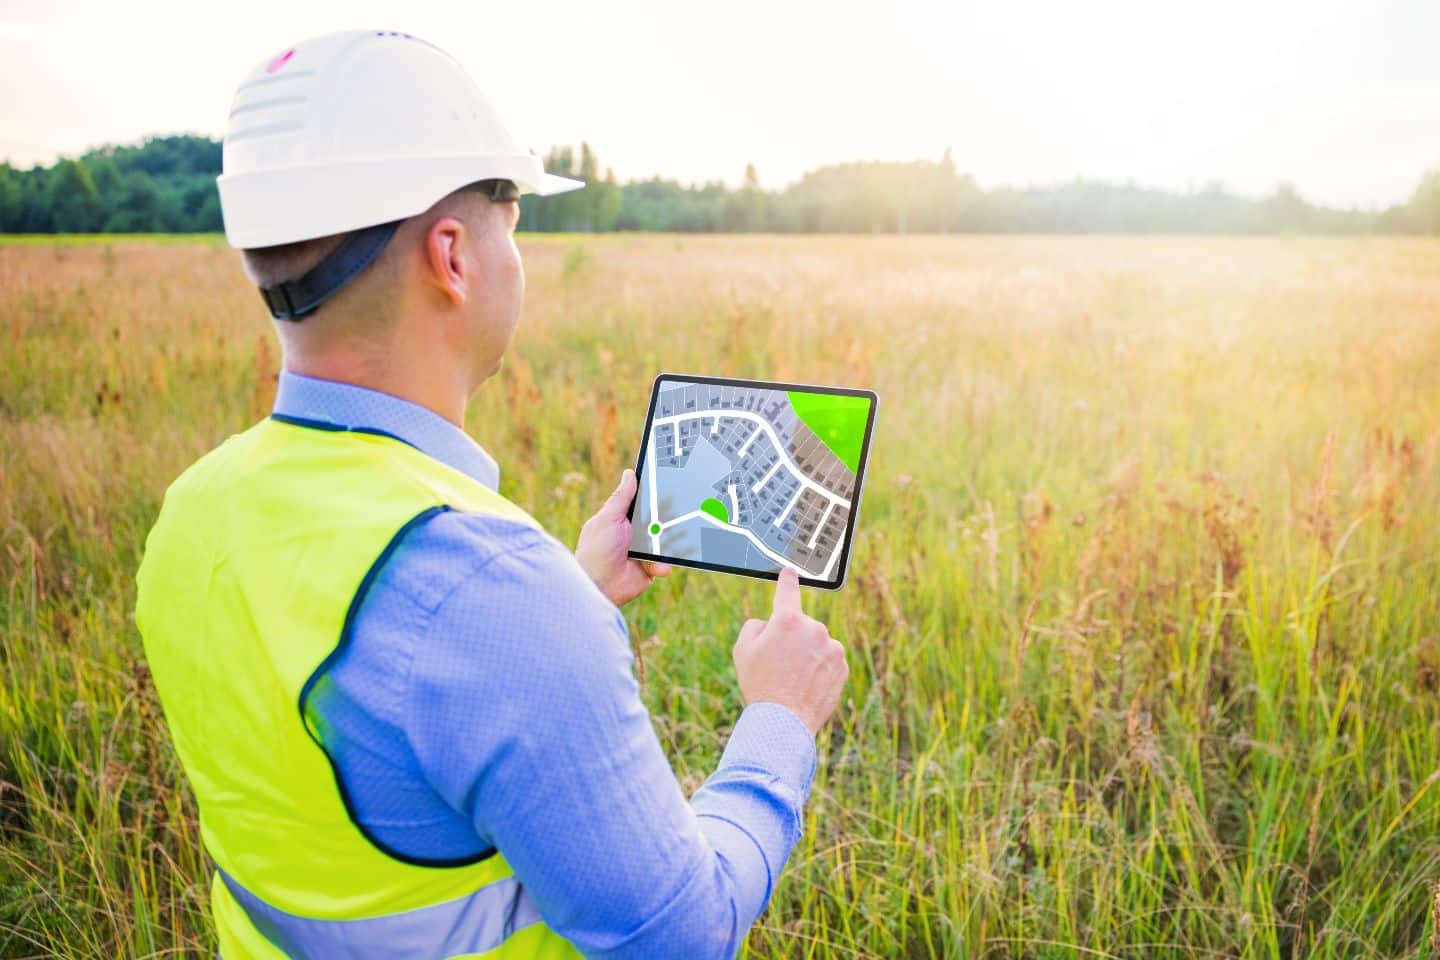 Acworth, GA - Land Development Performance Bond - Architect using a digital tablet with blueprints and surveying a new residential housing building land plot.